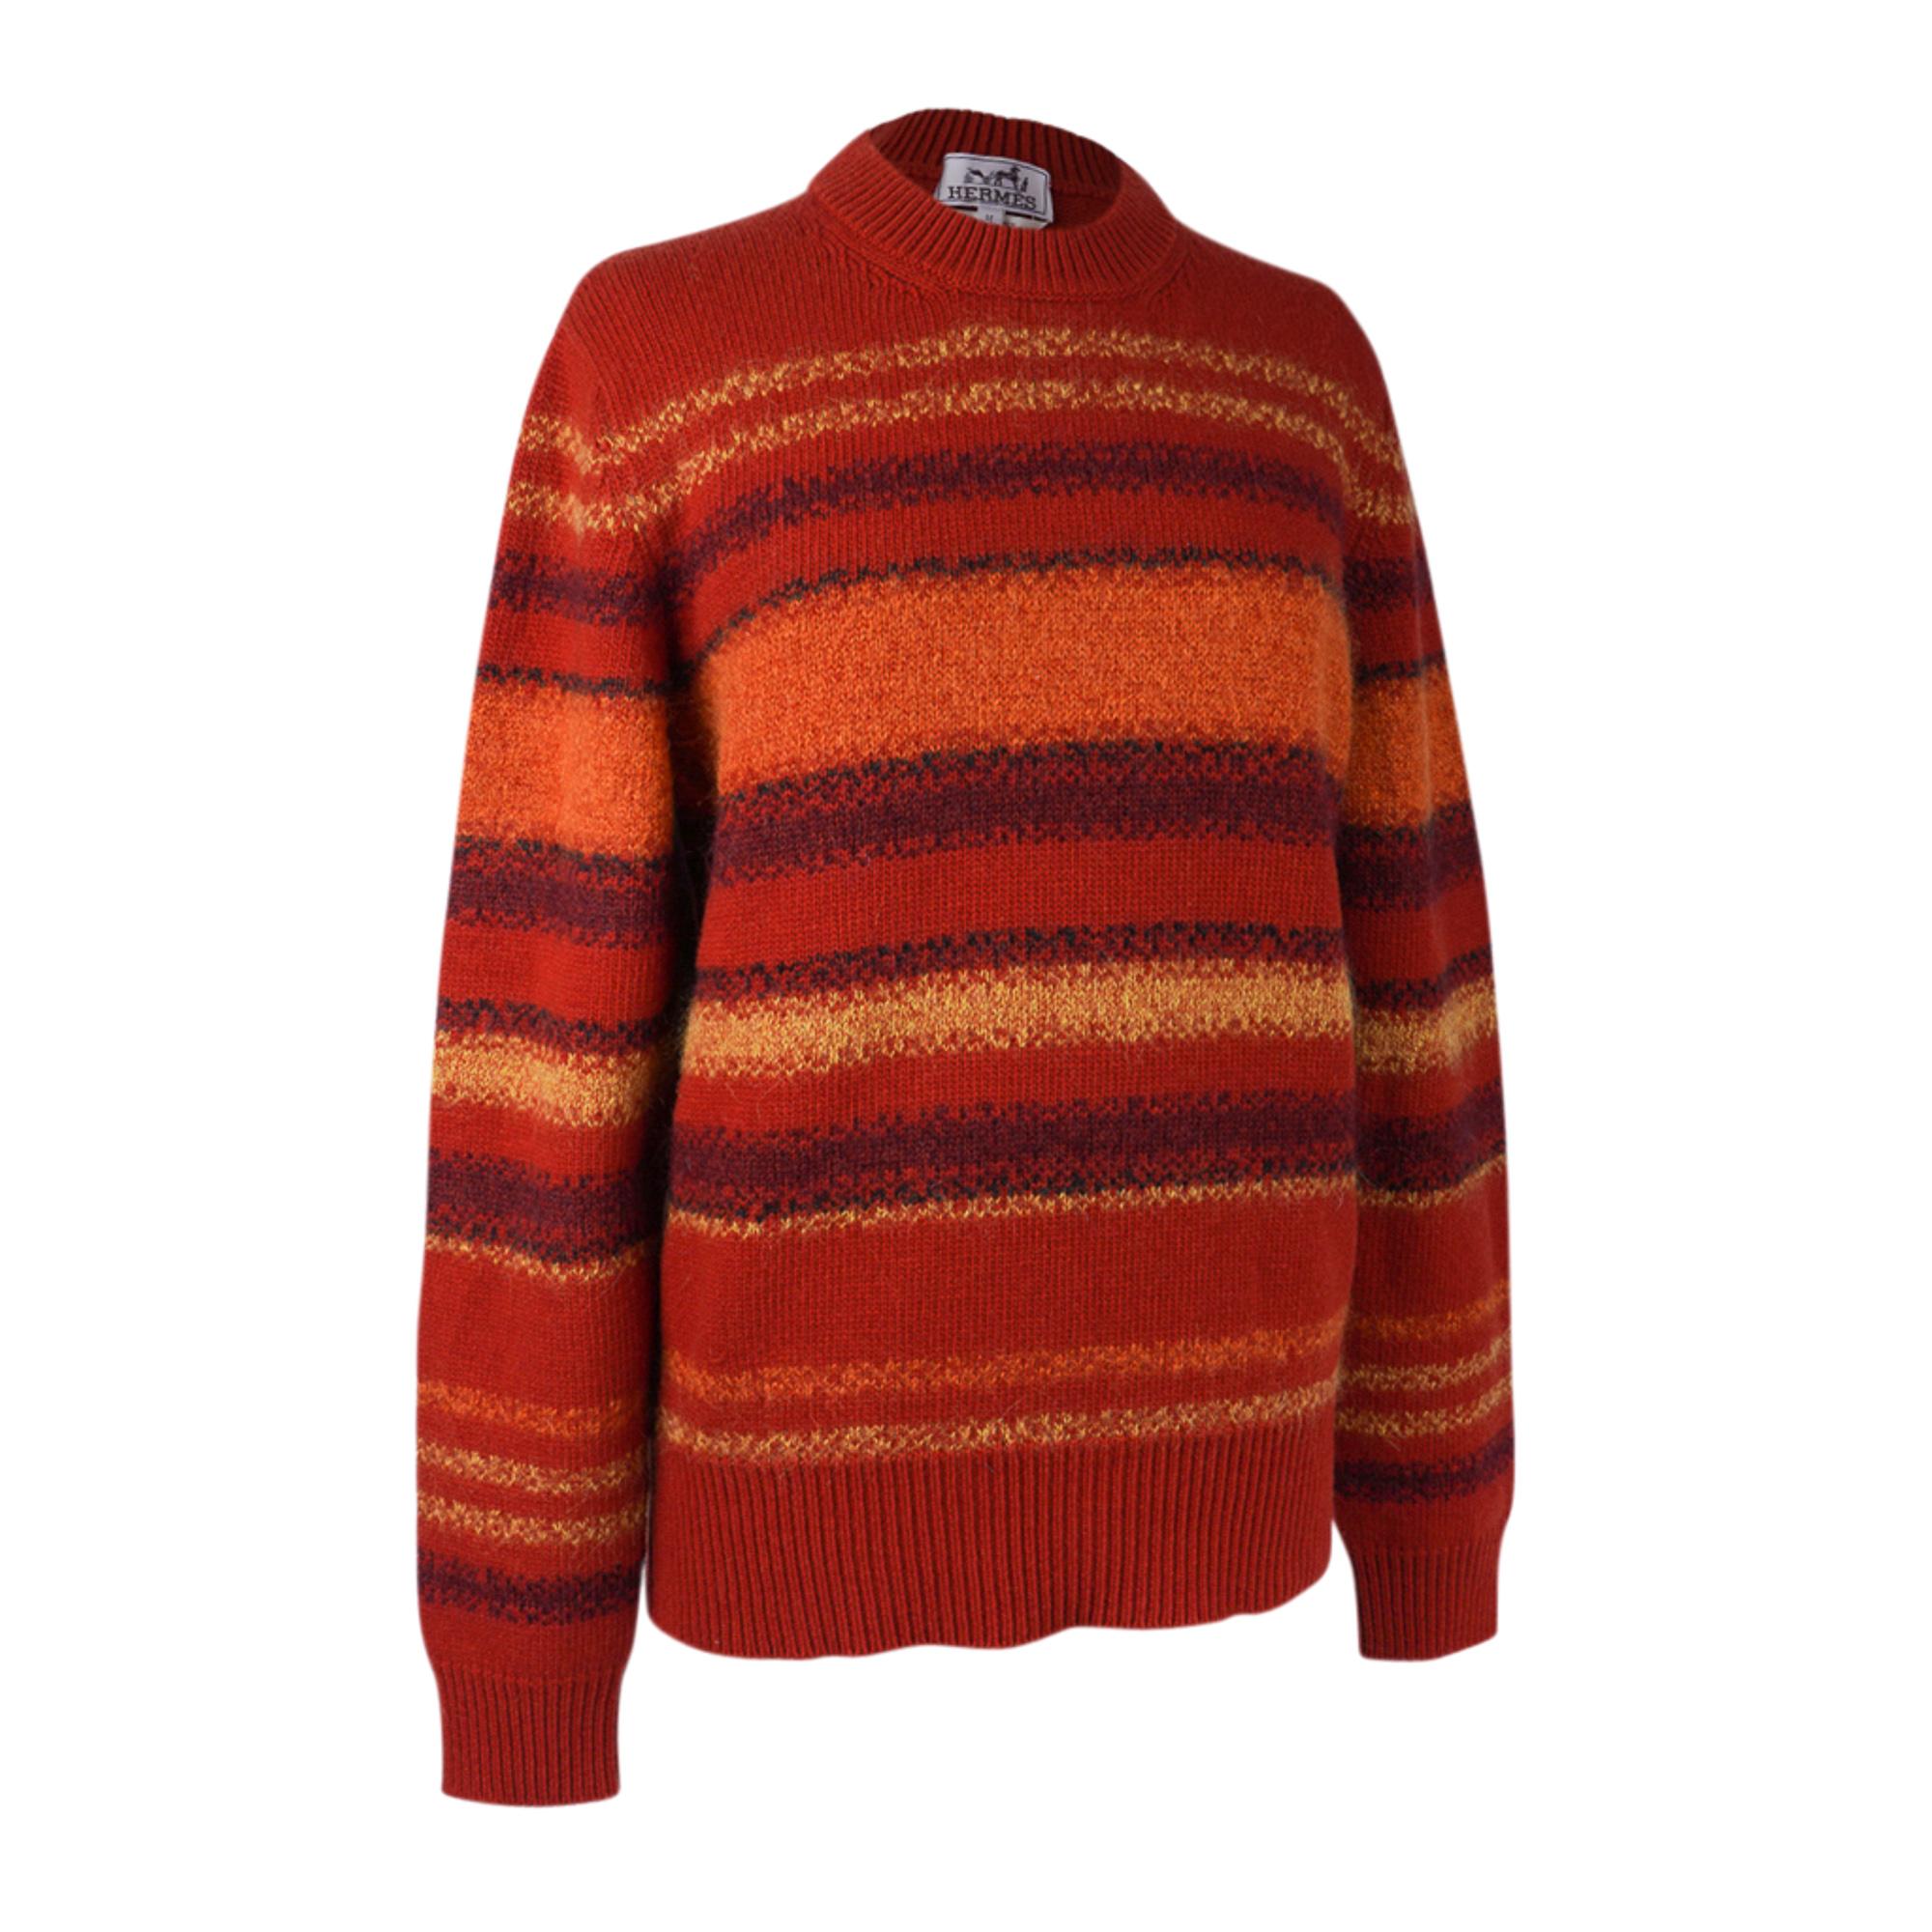 Mightychic offers an Hermes Men's Rayures Fondues (melted stripes) crewneck sweater featured in Orange Brulee.
Rich warm toned hues will compliment a myriad of  warbrobes.
Sweater has Linear pattern all around.
Ribbing at cuffs, hip and neck.
Fabric